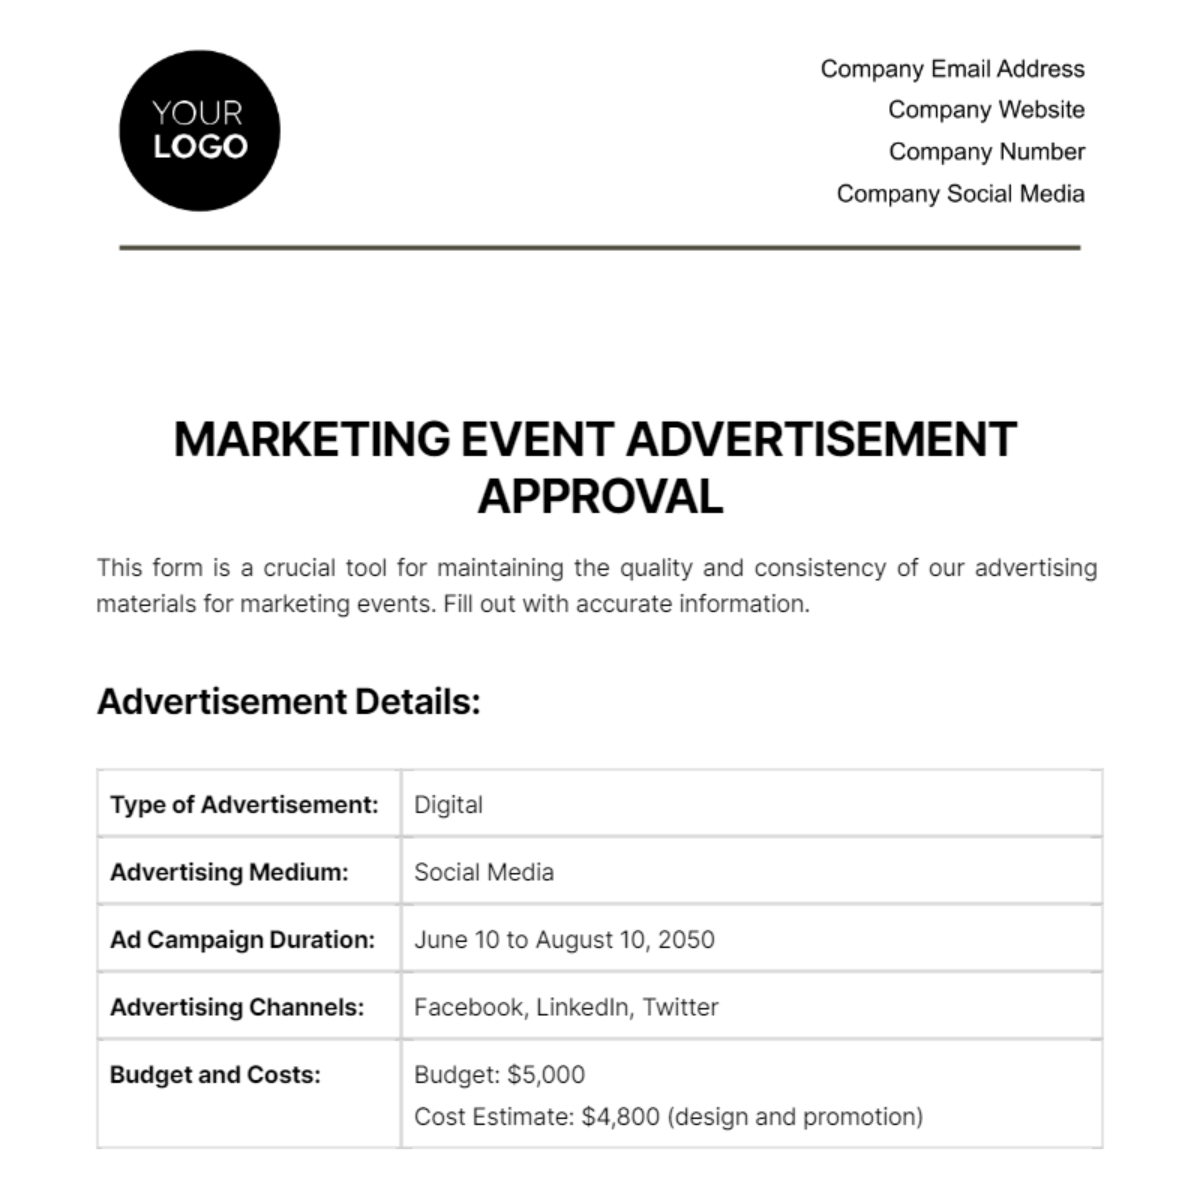 Marketing Event Advertisement Approval Template